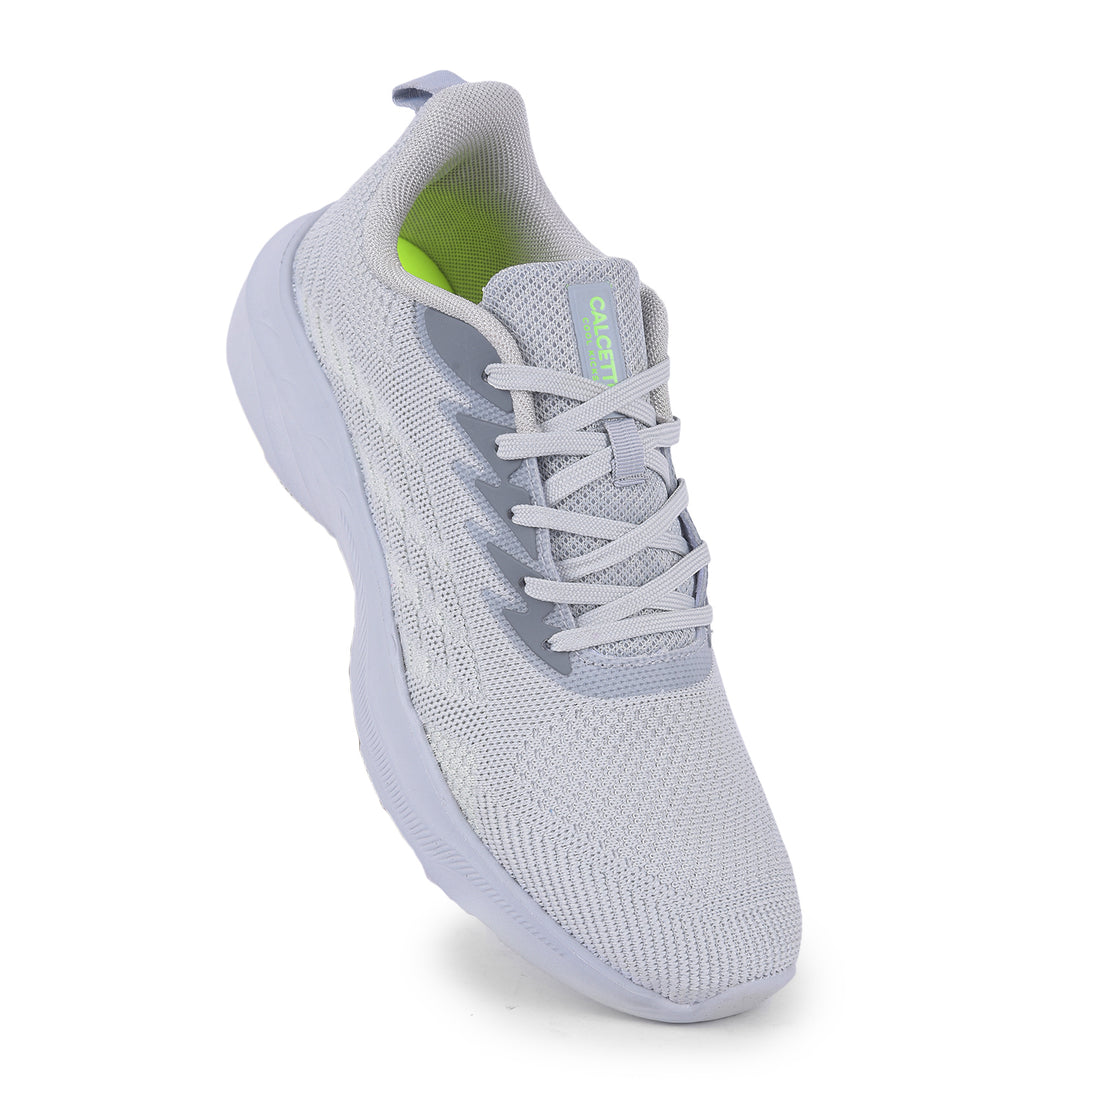 Calcetto CLT-2045 L Grey Sports Shoes For Men